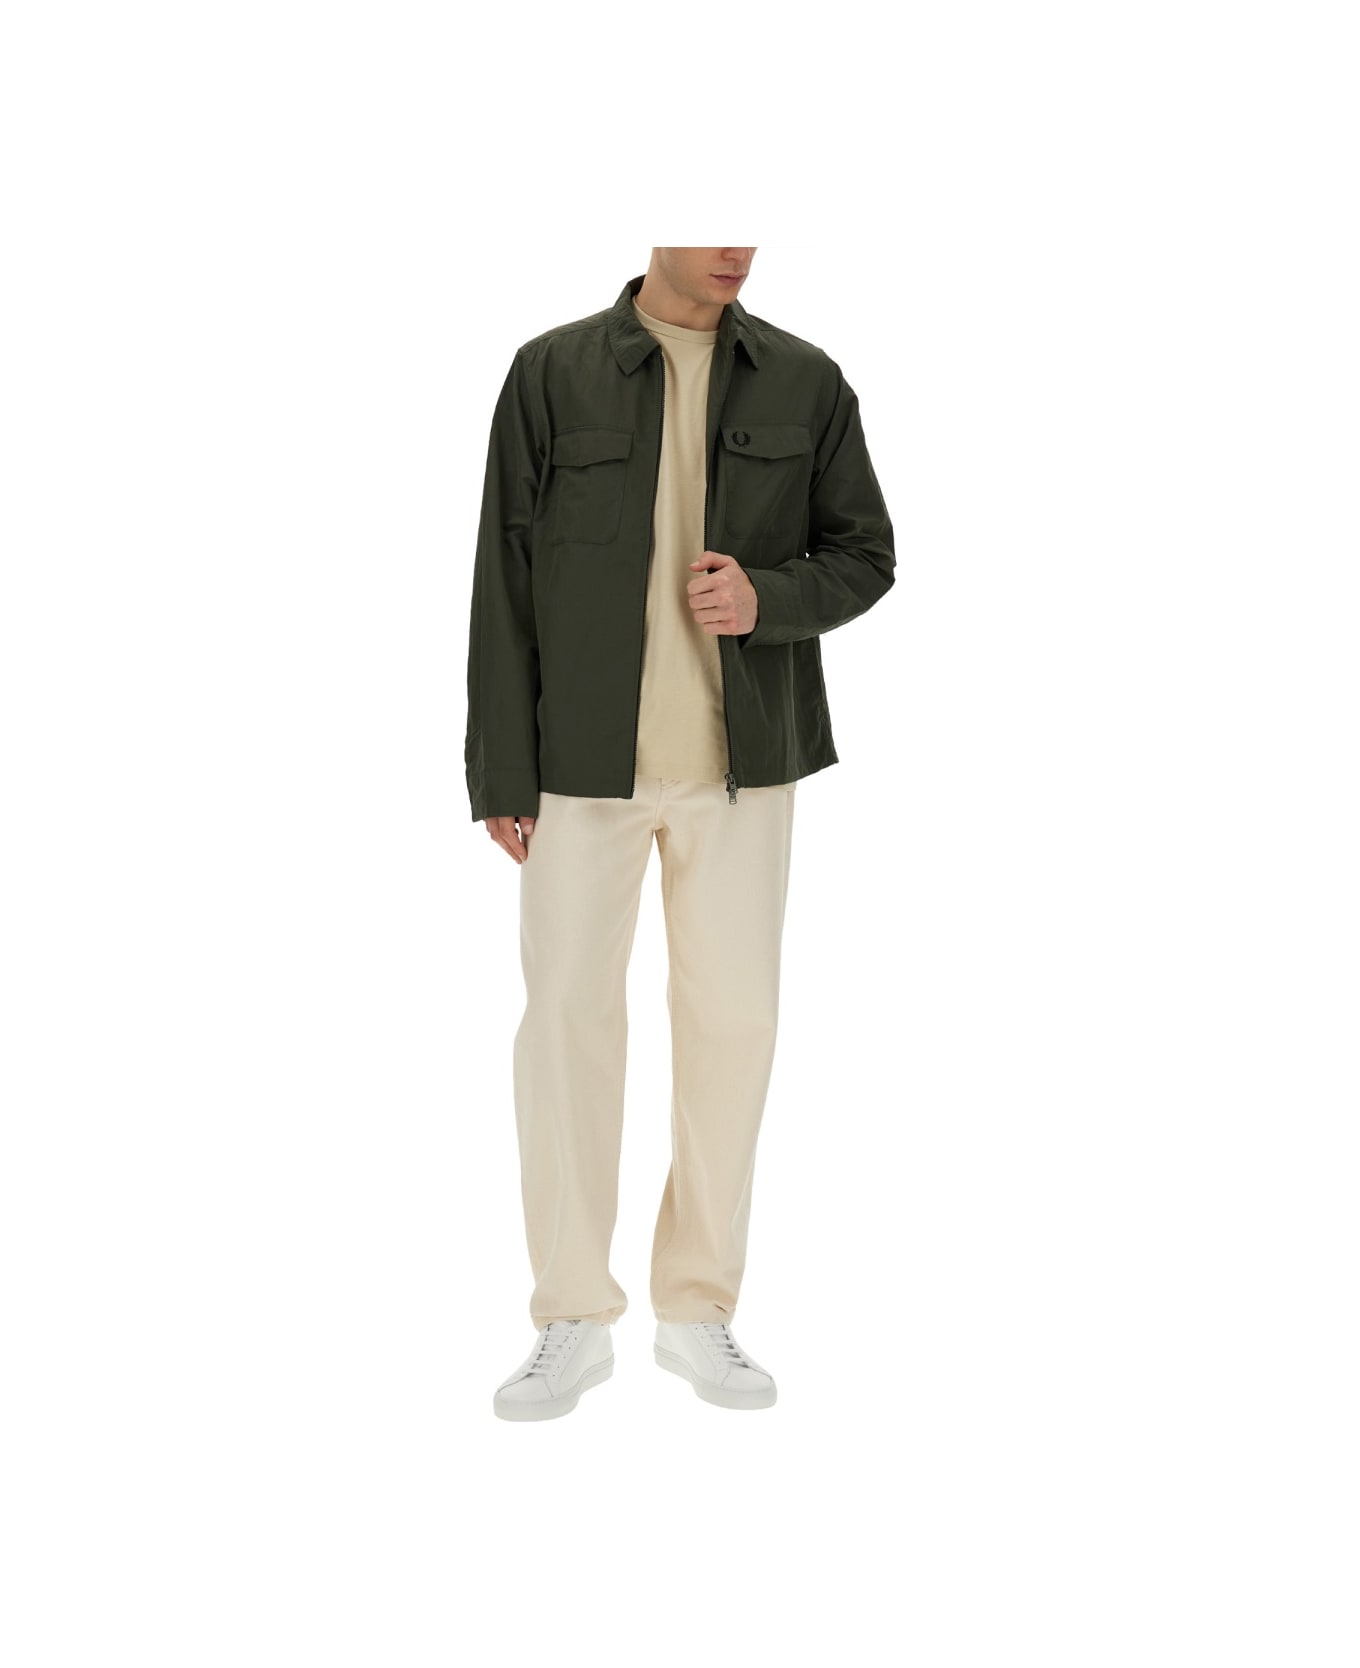 Fred Perry Shirt Jacket - MILITARY GREEN ジャケット